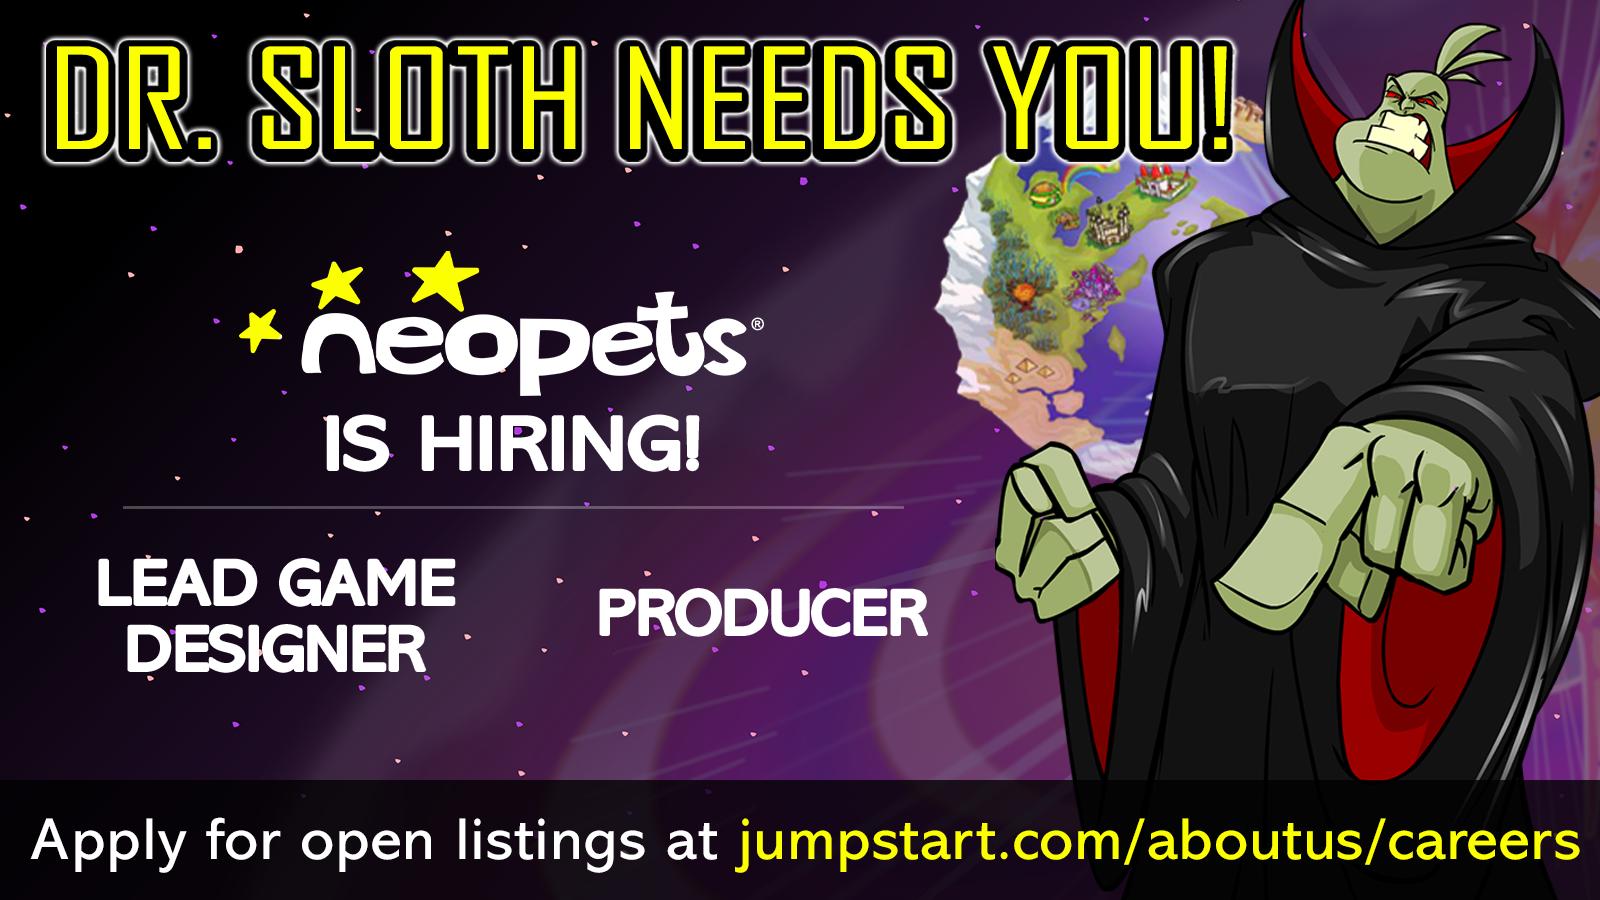 https://images.neopets.com/images/nf/neopets_hiring_image.png